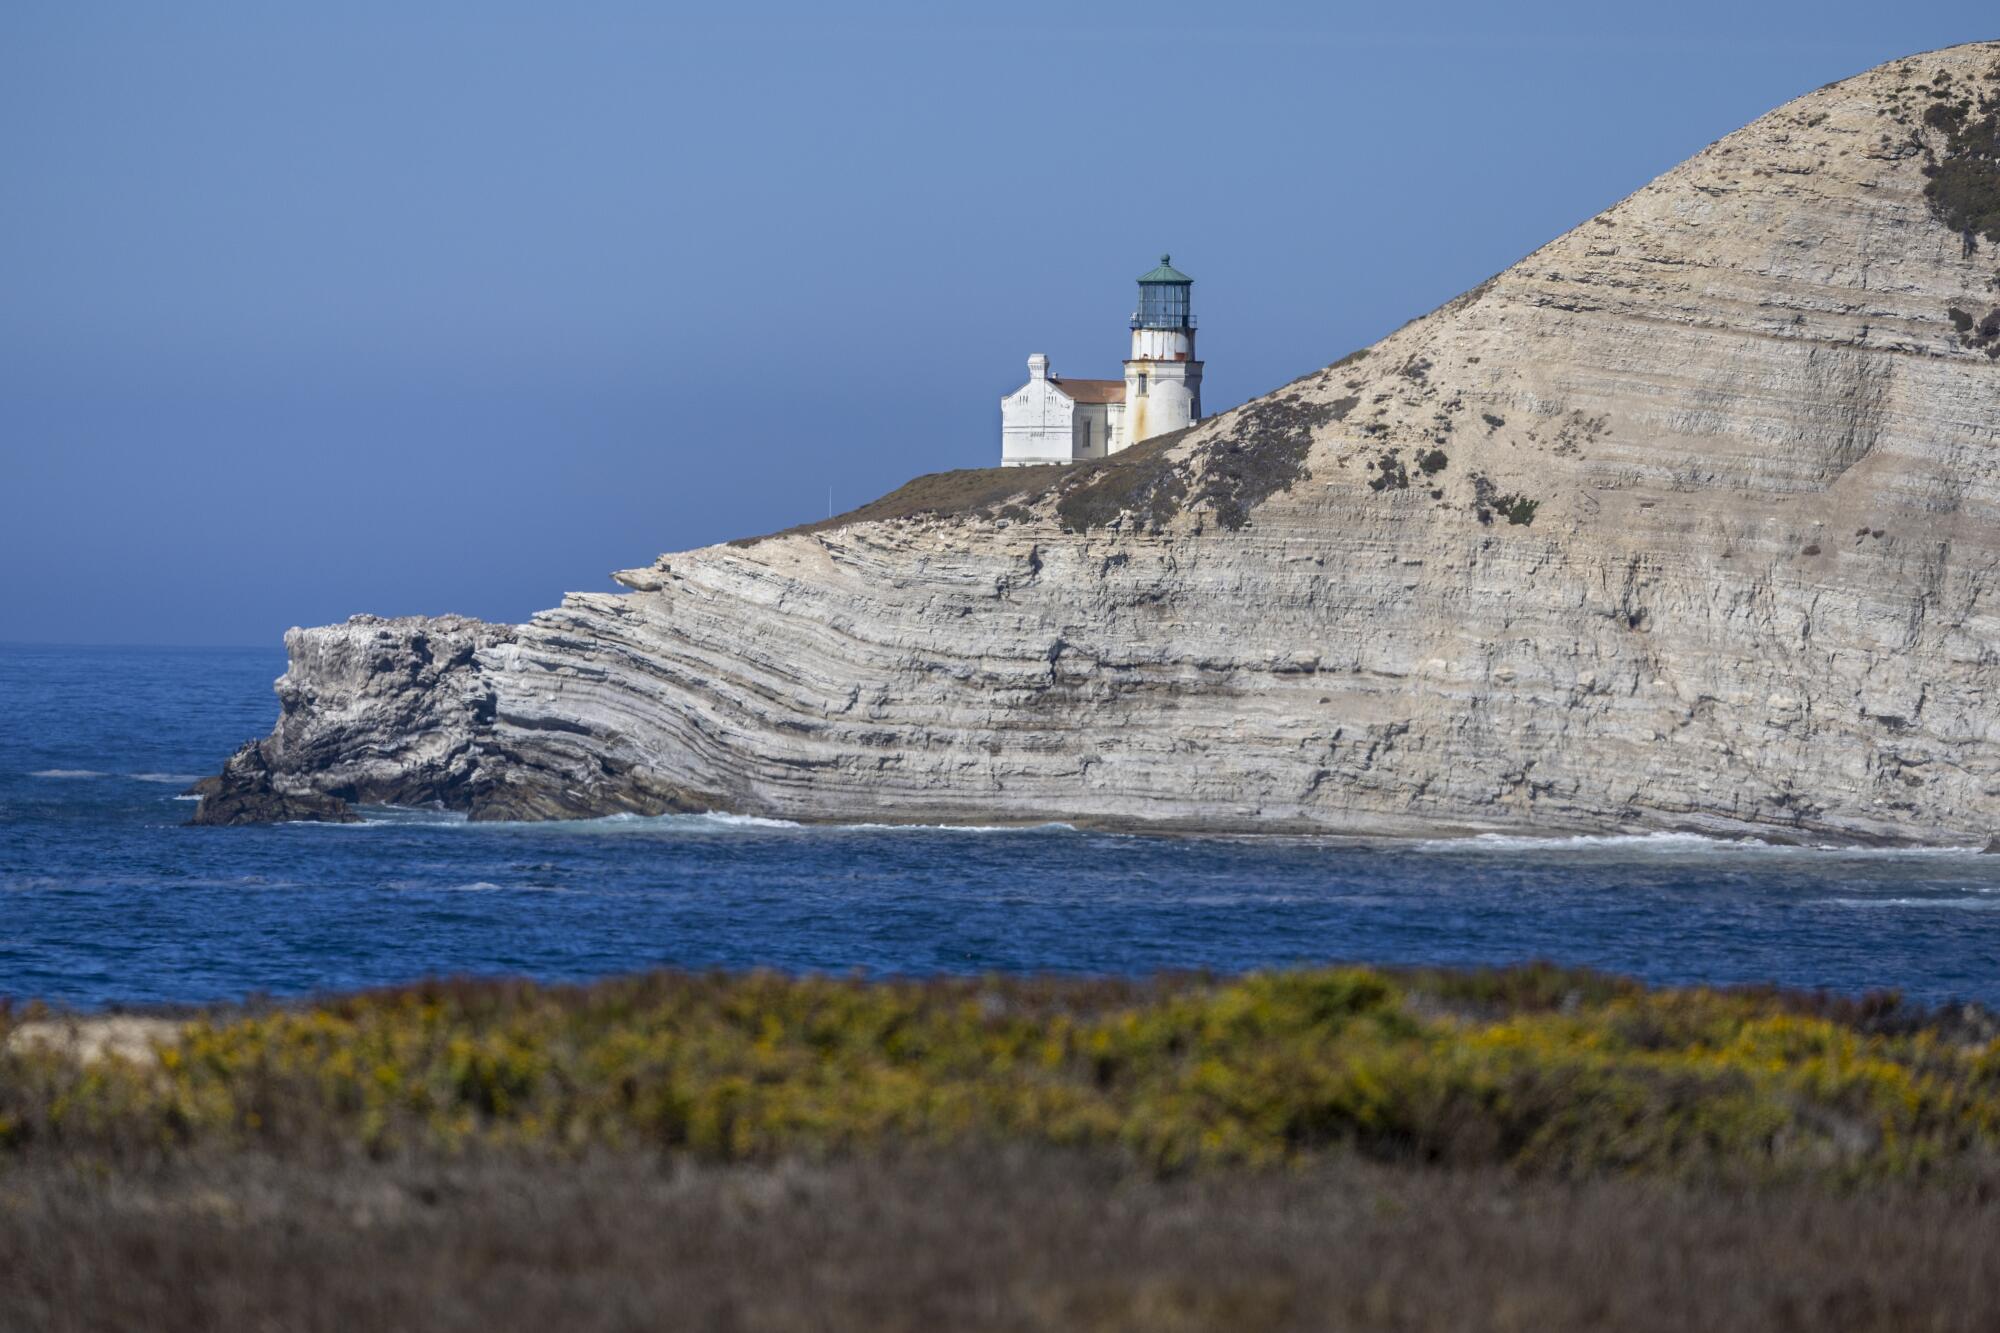 A view of the Point Conception Lighthouse.